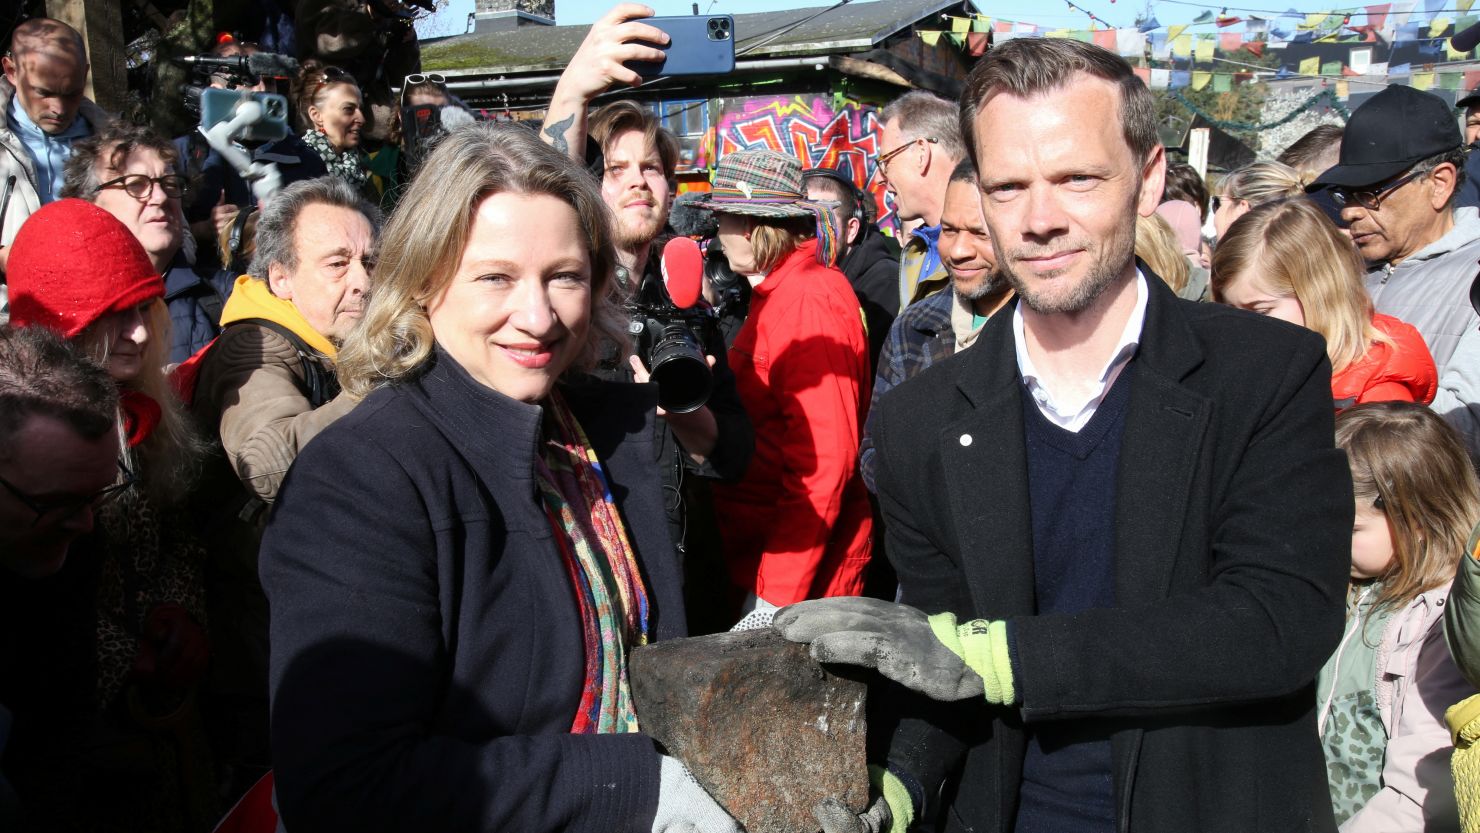 Mayor of Copenhagen Sophie Haestorp Andersen and Danish Justice Minister Peter Hummelgaard hold a cobble stone removed by residents from the area of Freetown Christiania known as the "Pusher Street" on Saturday.